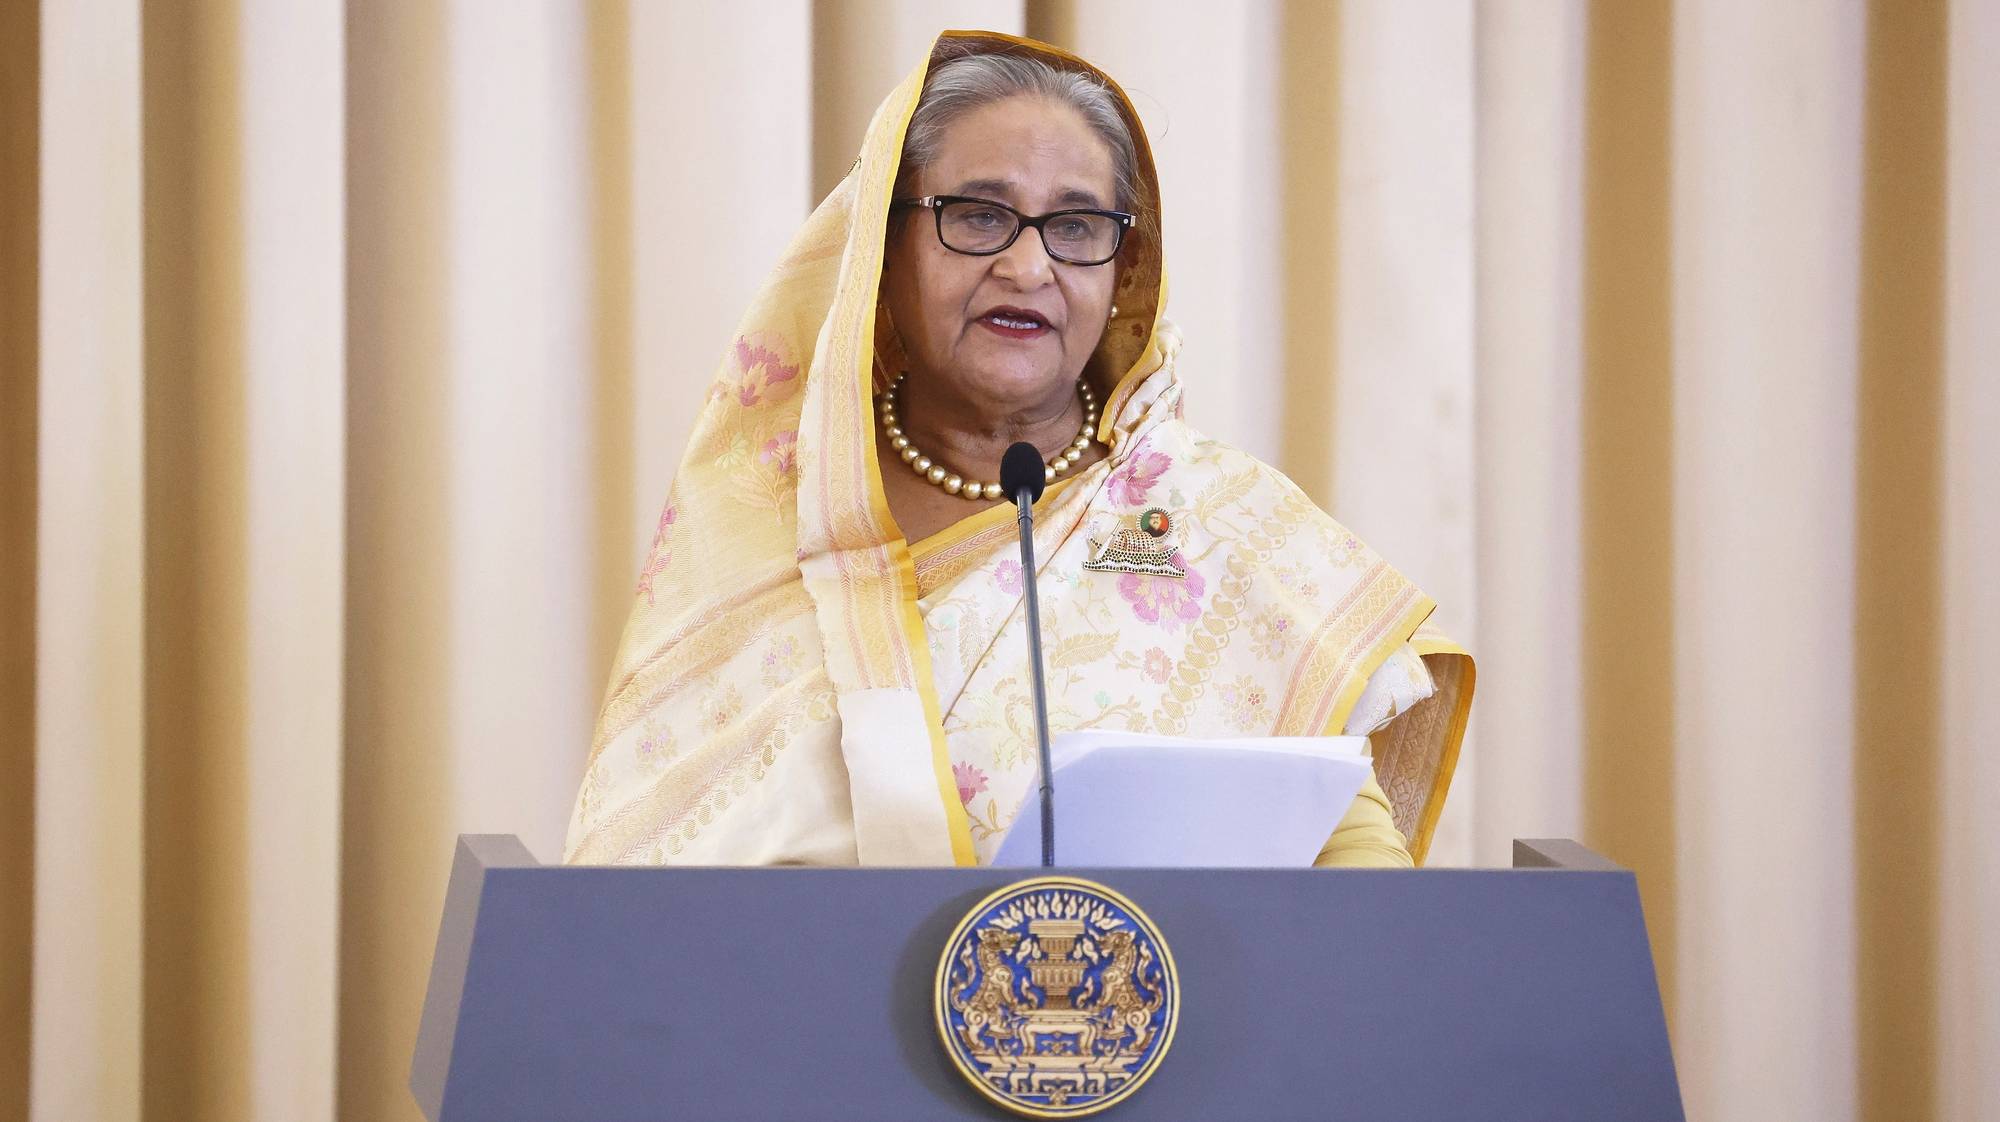 epa11526981 (FILE) Bangladesh Prime Minister Sheikh Hasina delivers a joint statement at the Government House in Bangkok, Thailand, 26 April 2024 (reissued 05 August 2024). Dhaka authorities have imposed a new curfew starting 06:00 p.m. local time on 04 August. As casualties mounted and law enforcement struggled to contain the unrest, the Bangladeshi government on 20 July 2024 had imposed an initial nationwide curfew and deployed military forces after violence broke out in Dhaka and other regions following student-led protests demanding reforms to the government&#039;s job quota system.  EPA/NARONG SANGNAK